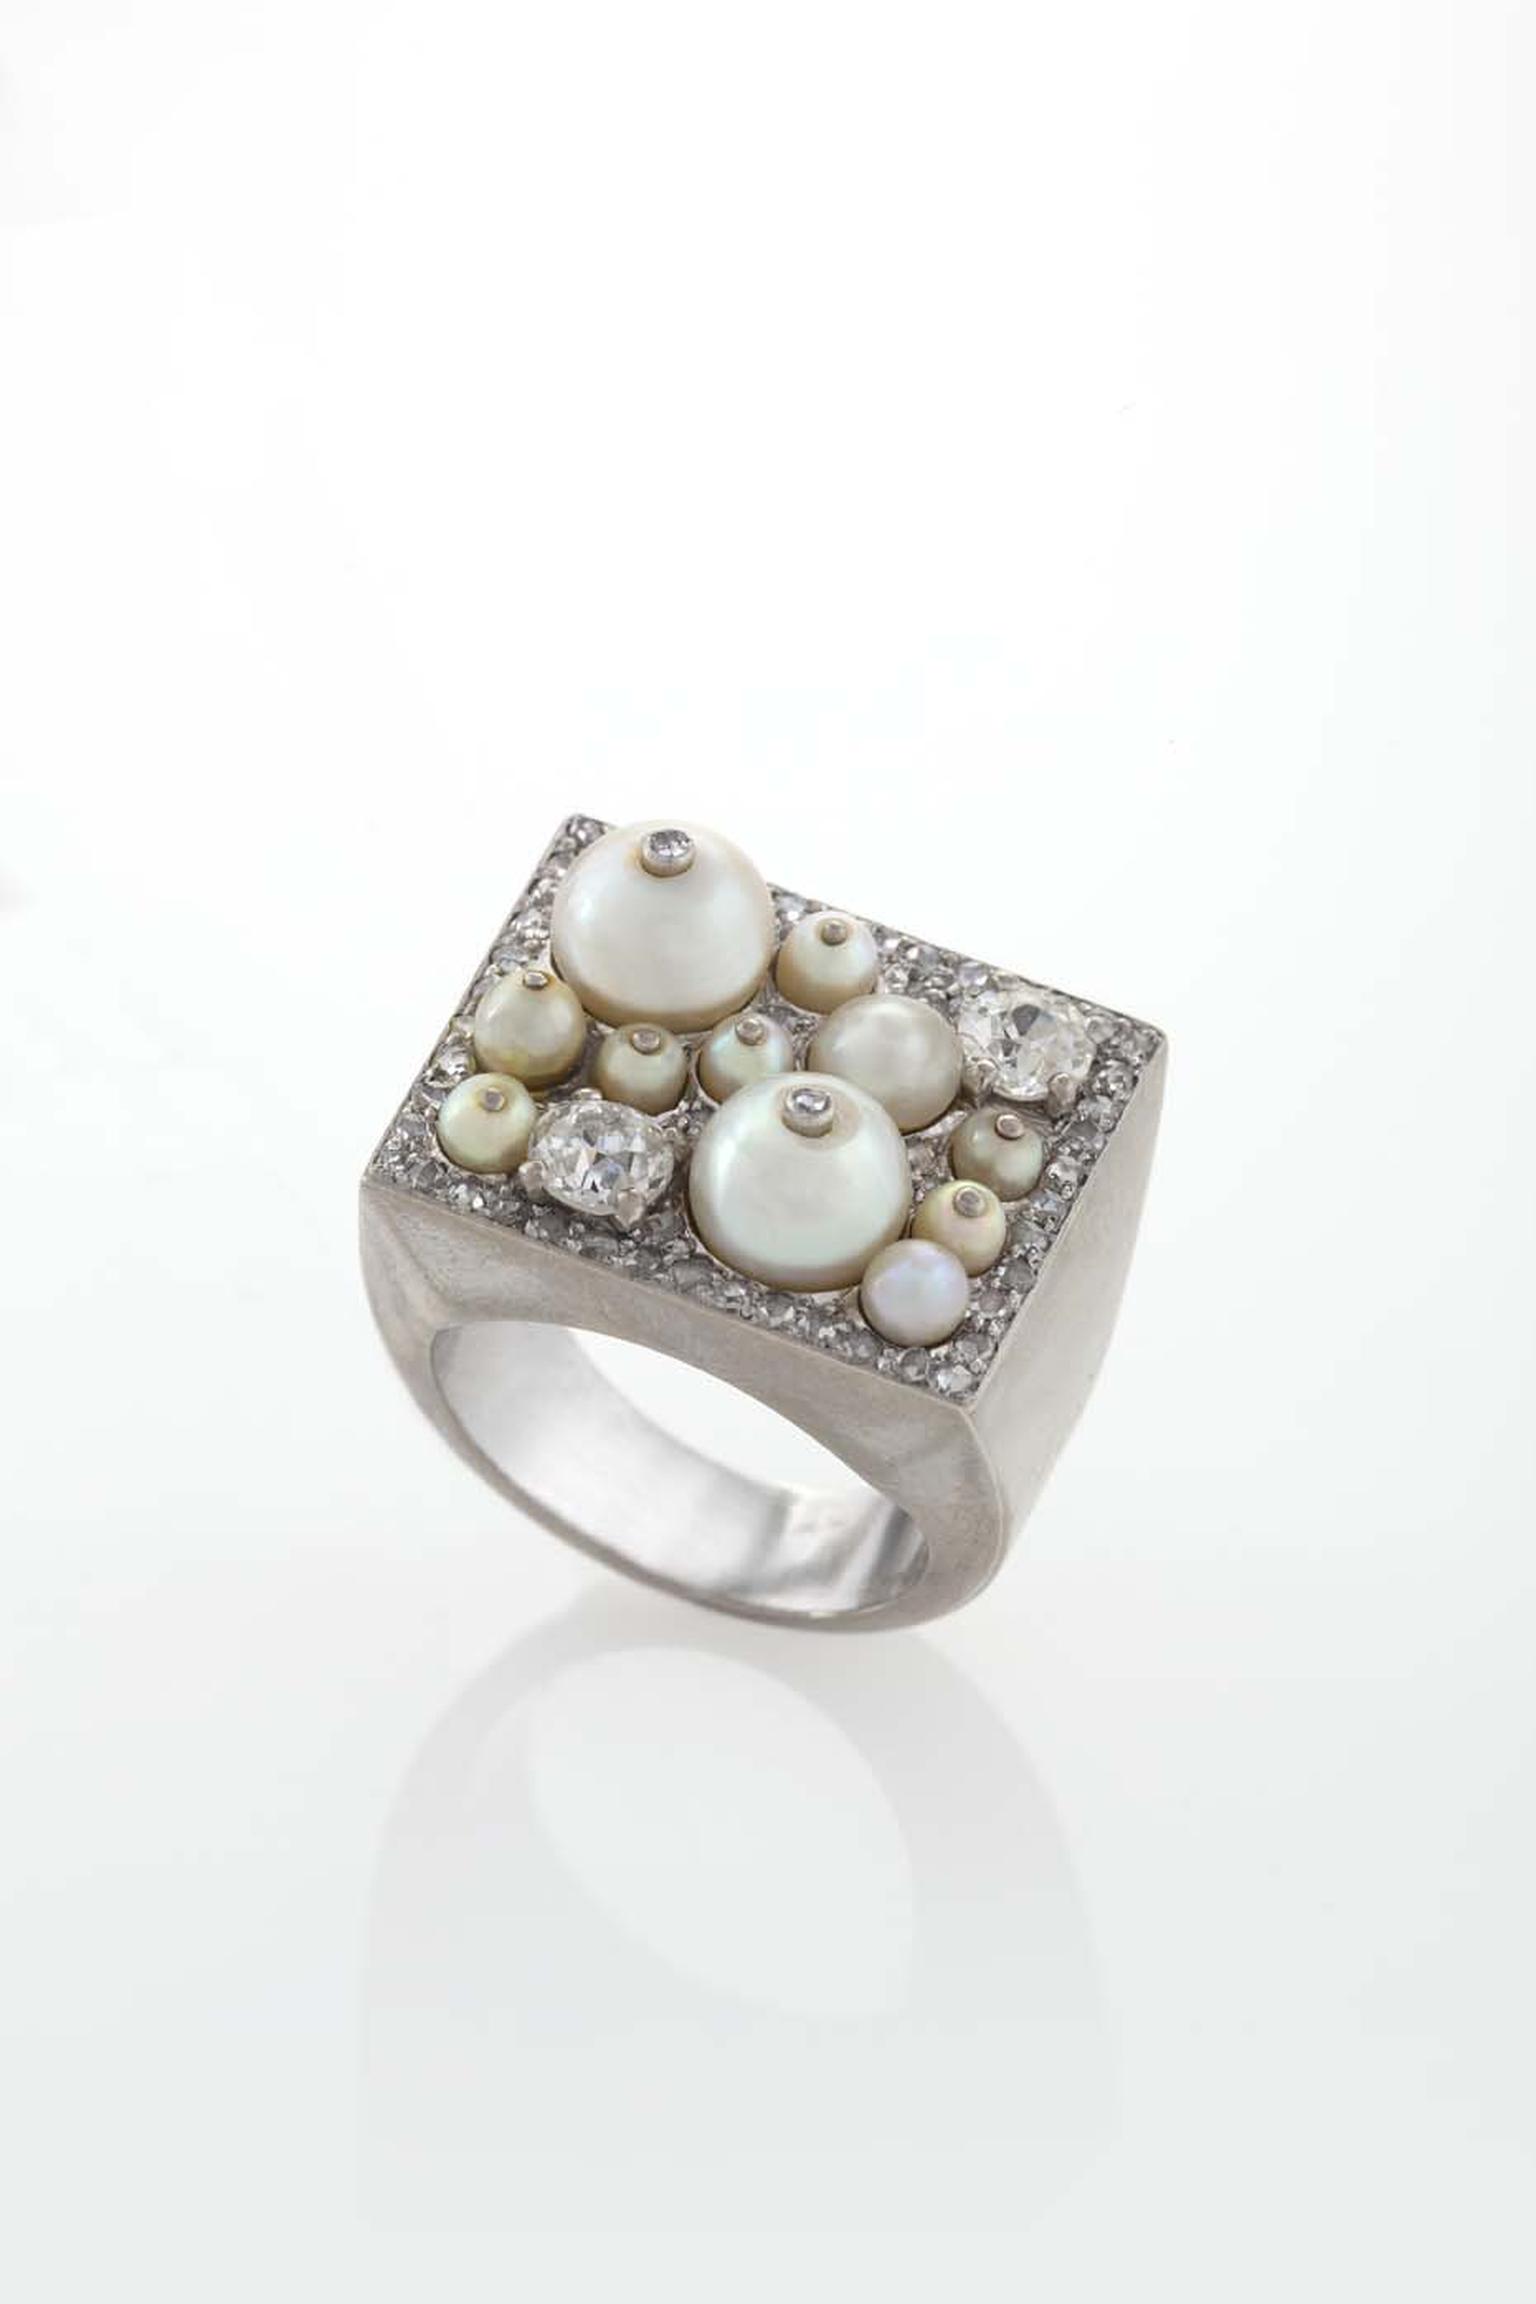 Cartier's Art Deco platinum and diamond ring with pearls, available at the Macklowe Gallery in New York.